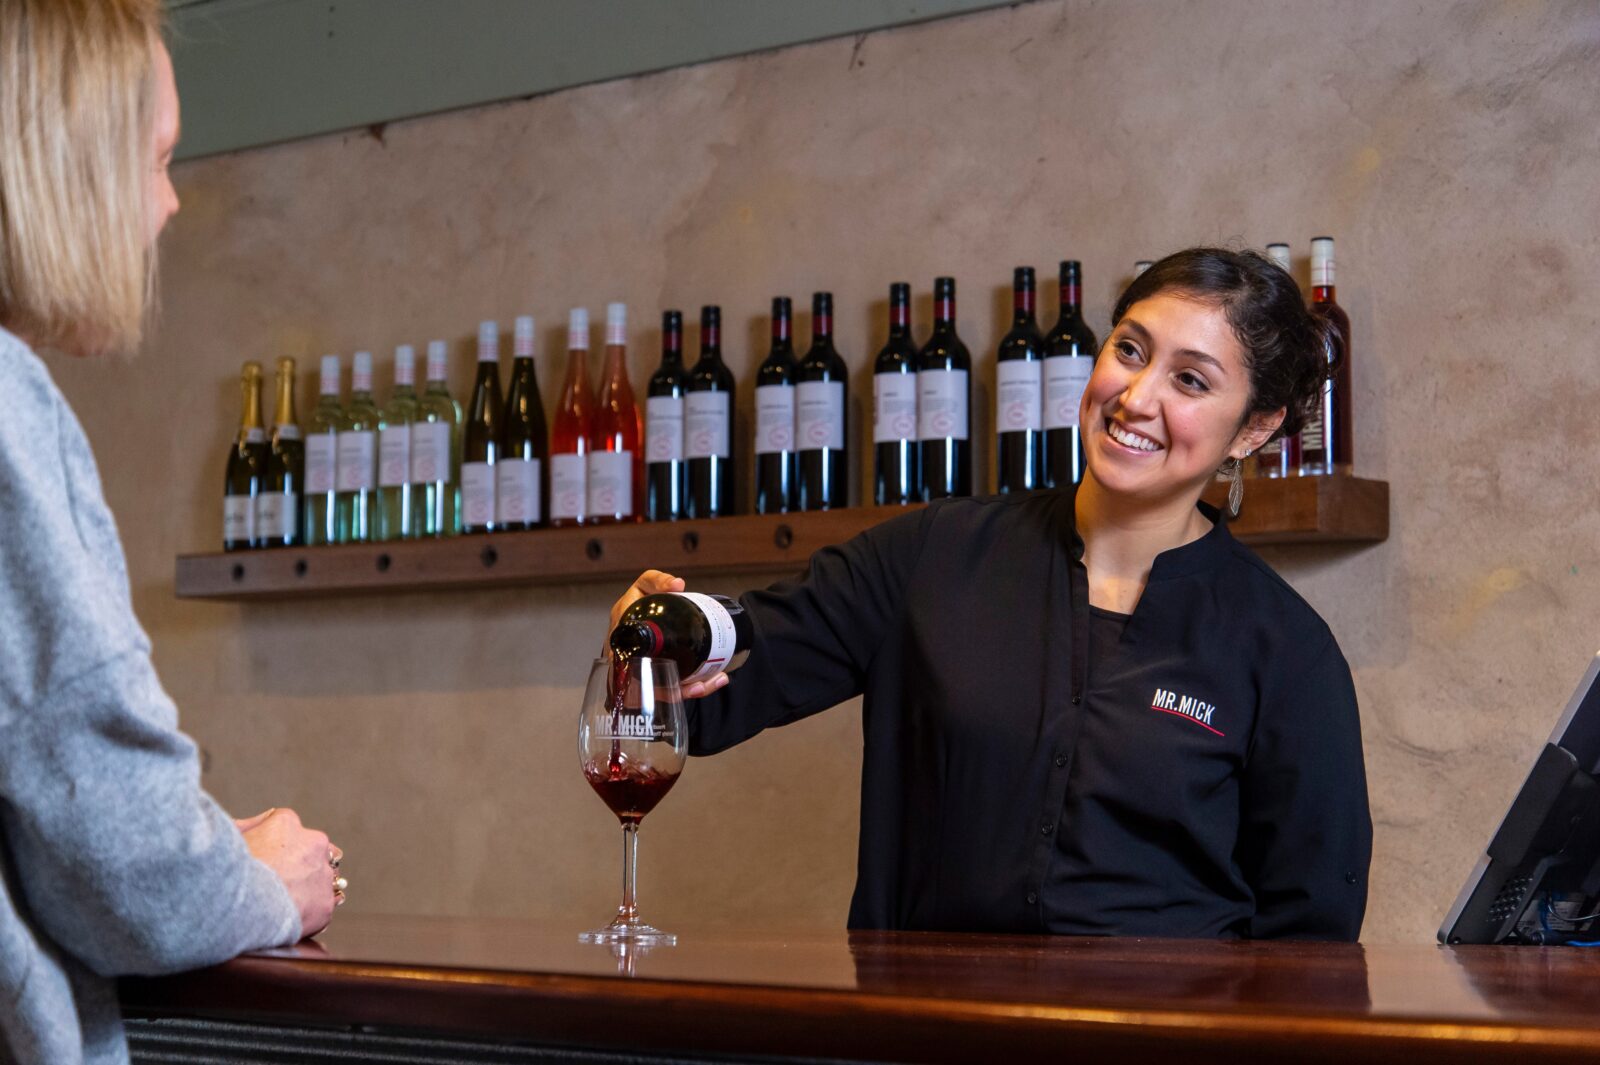 Enjoy wine tasting with our friendly professional staff